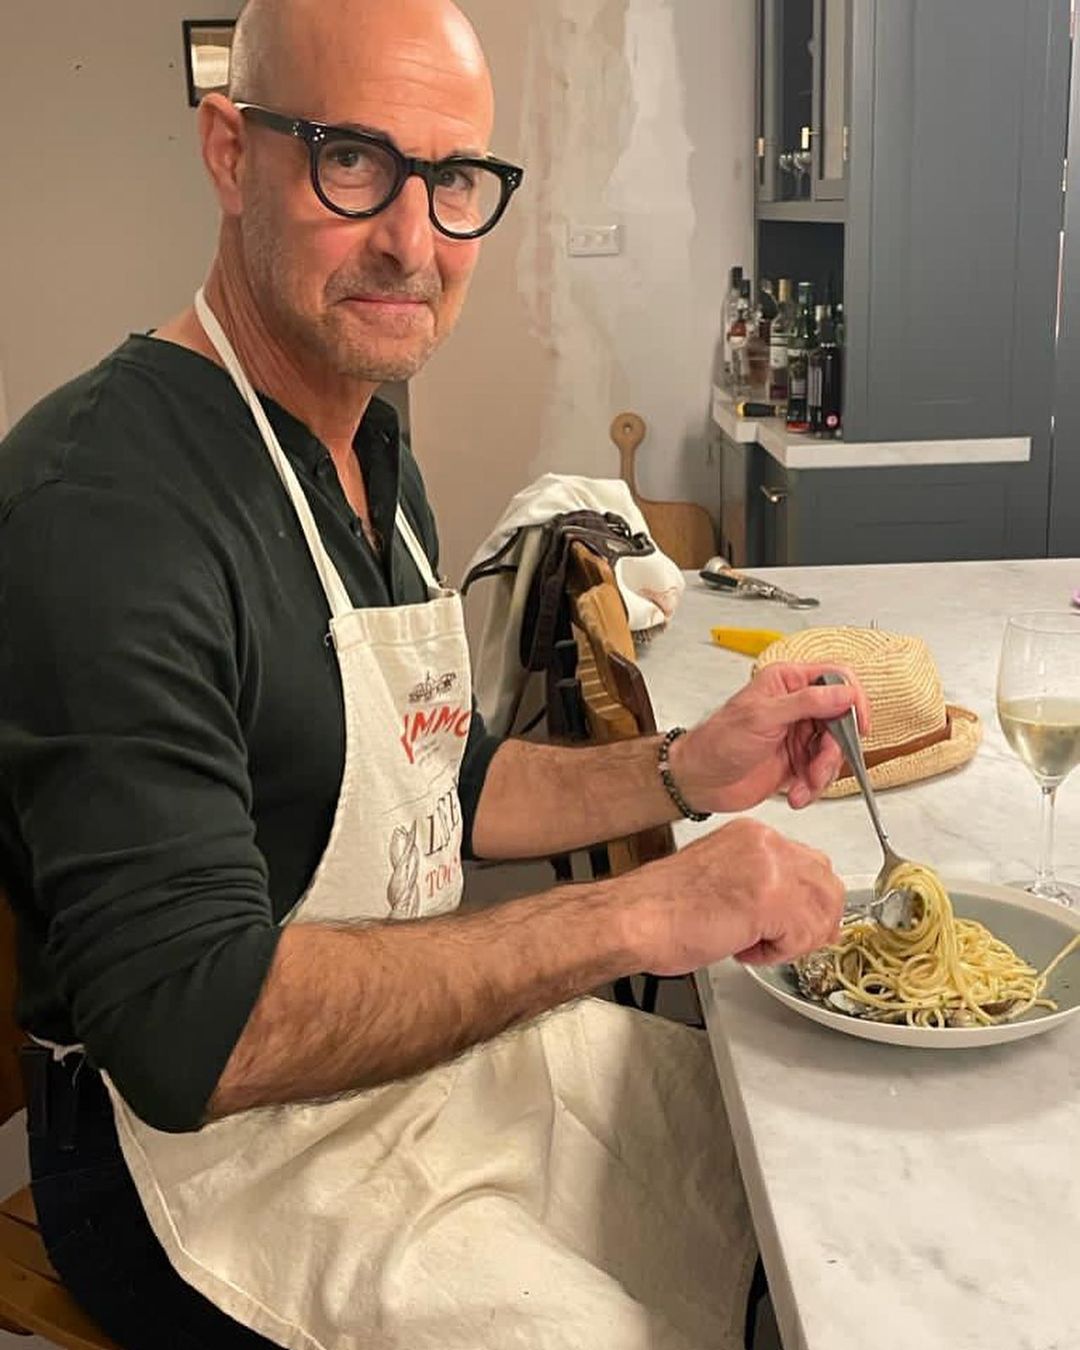 https://www.closerweekly.com/wp-content/uploads/2021/12/Hunger-Games-Actor-Stanley-Tucci-Is-a-Marvelous-Cook-Take-a-Tour-of-His-Rustic-London-Kitchen-5.jpg?fit=800%2C1000&quality=86&strip=all